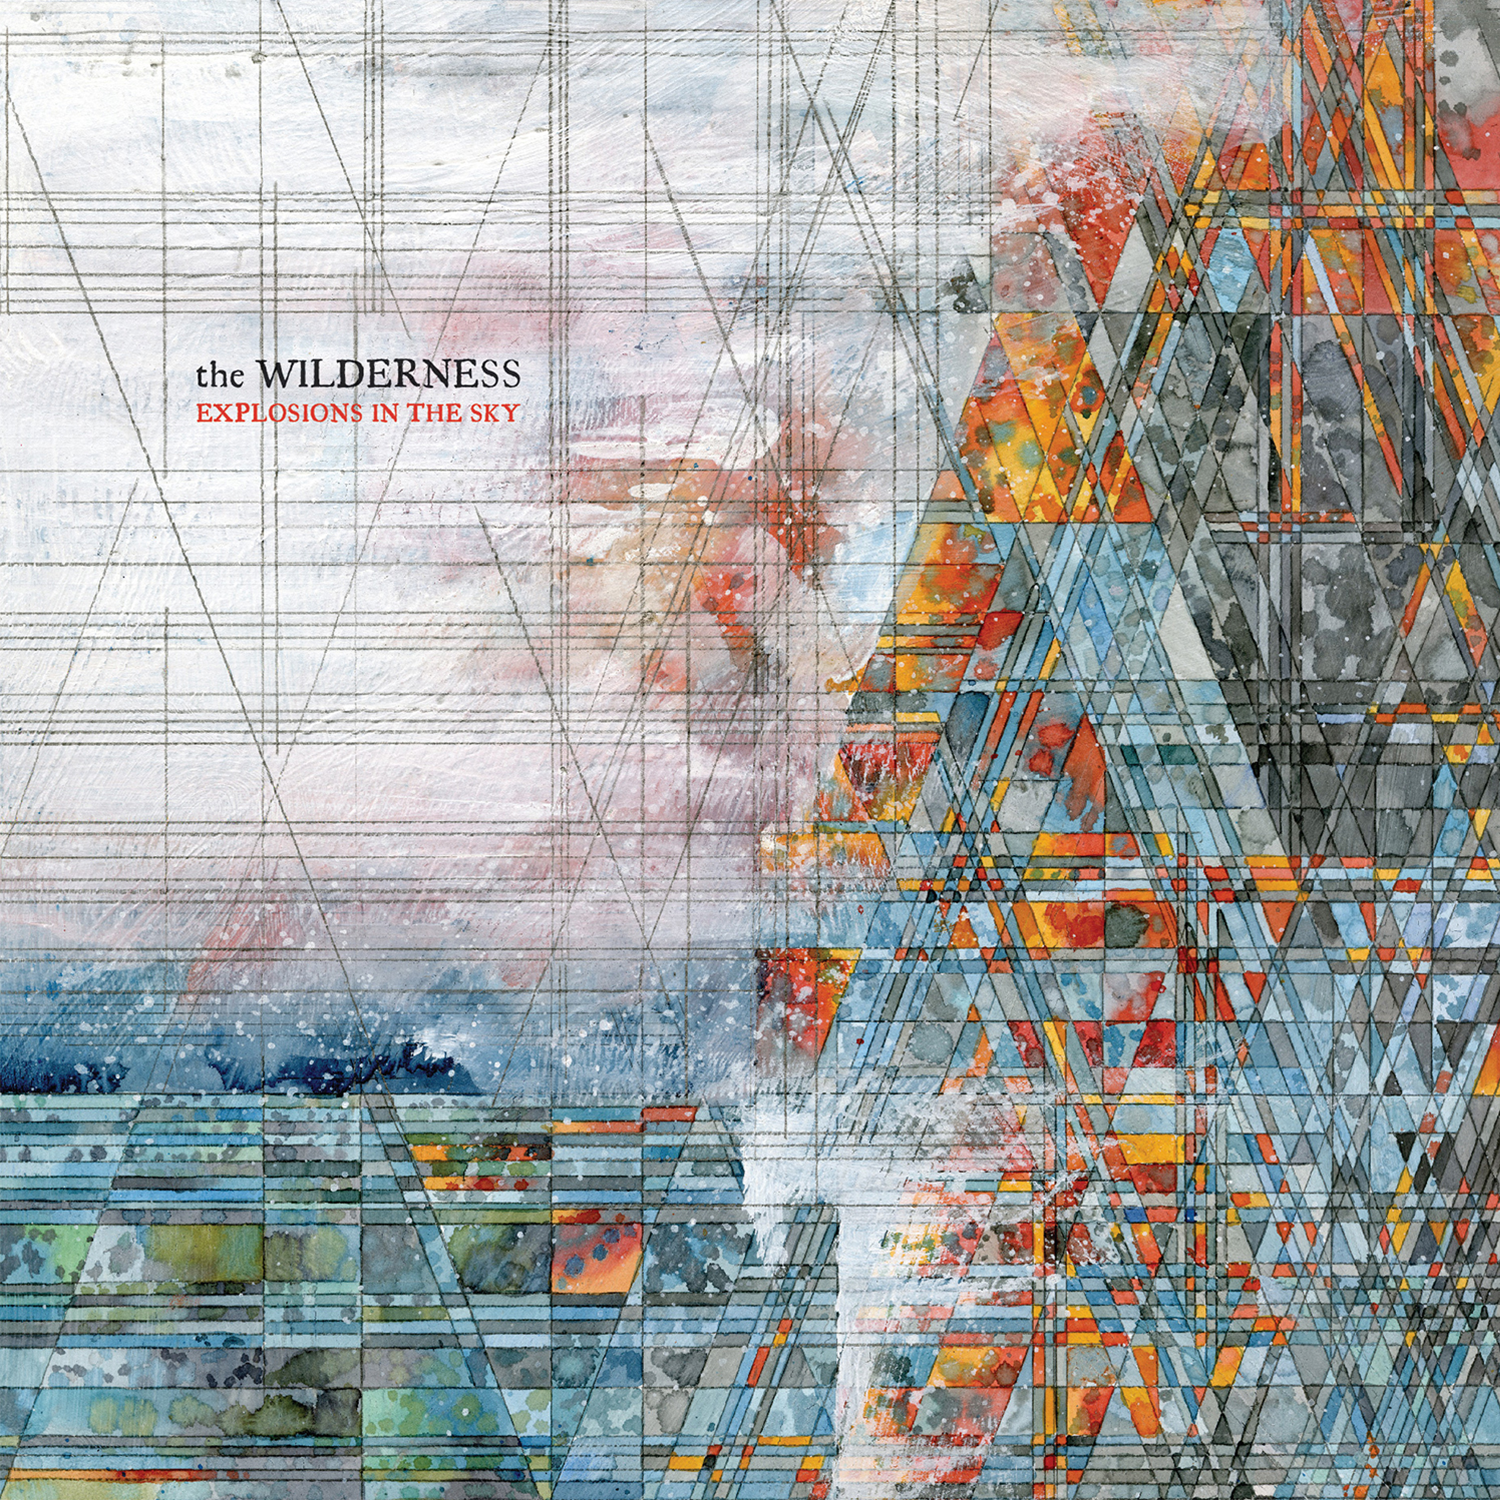 Album artwork for The Wilderness by Explosions In The Sky